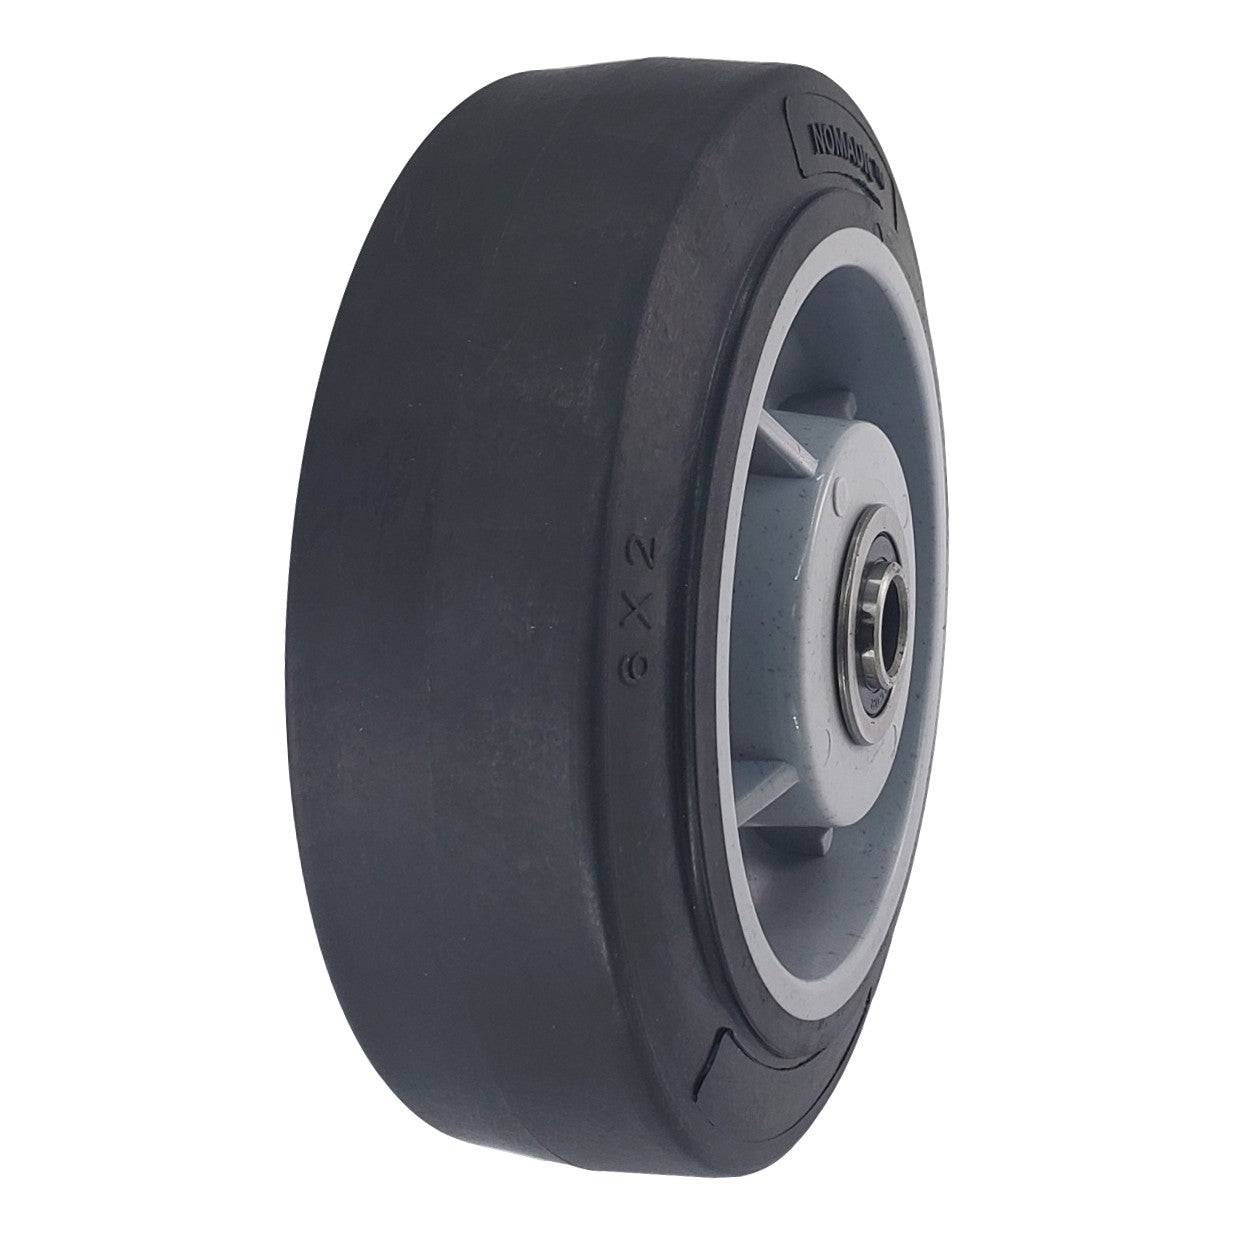 6" x 2" Nomadic Wheel - 600 lbs. capacity - Durable Superior Casters